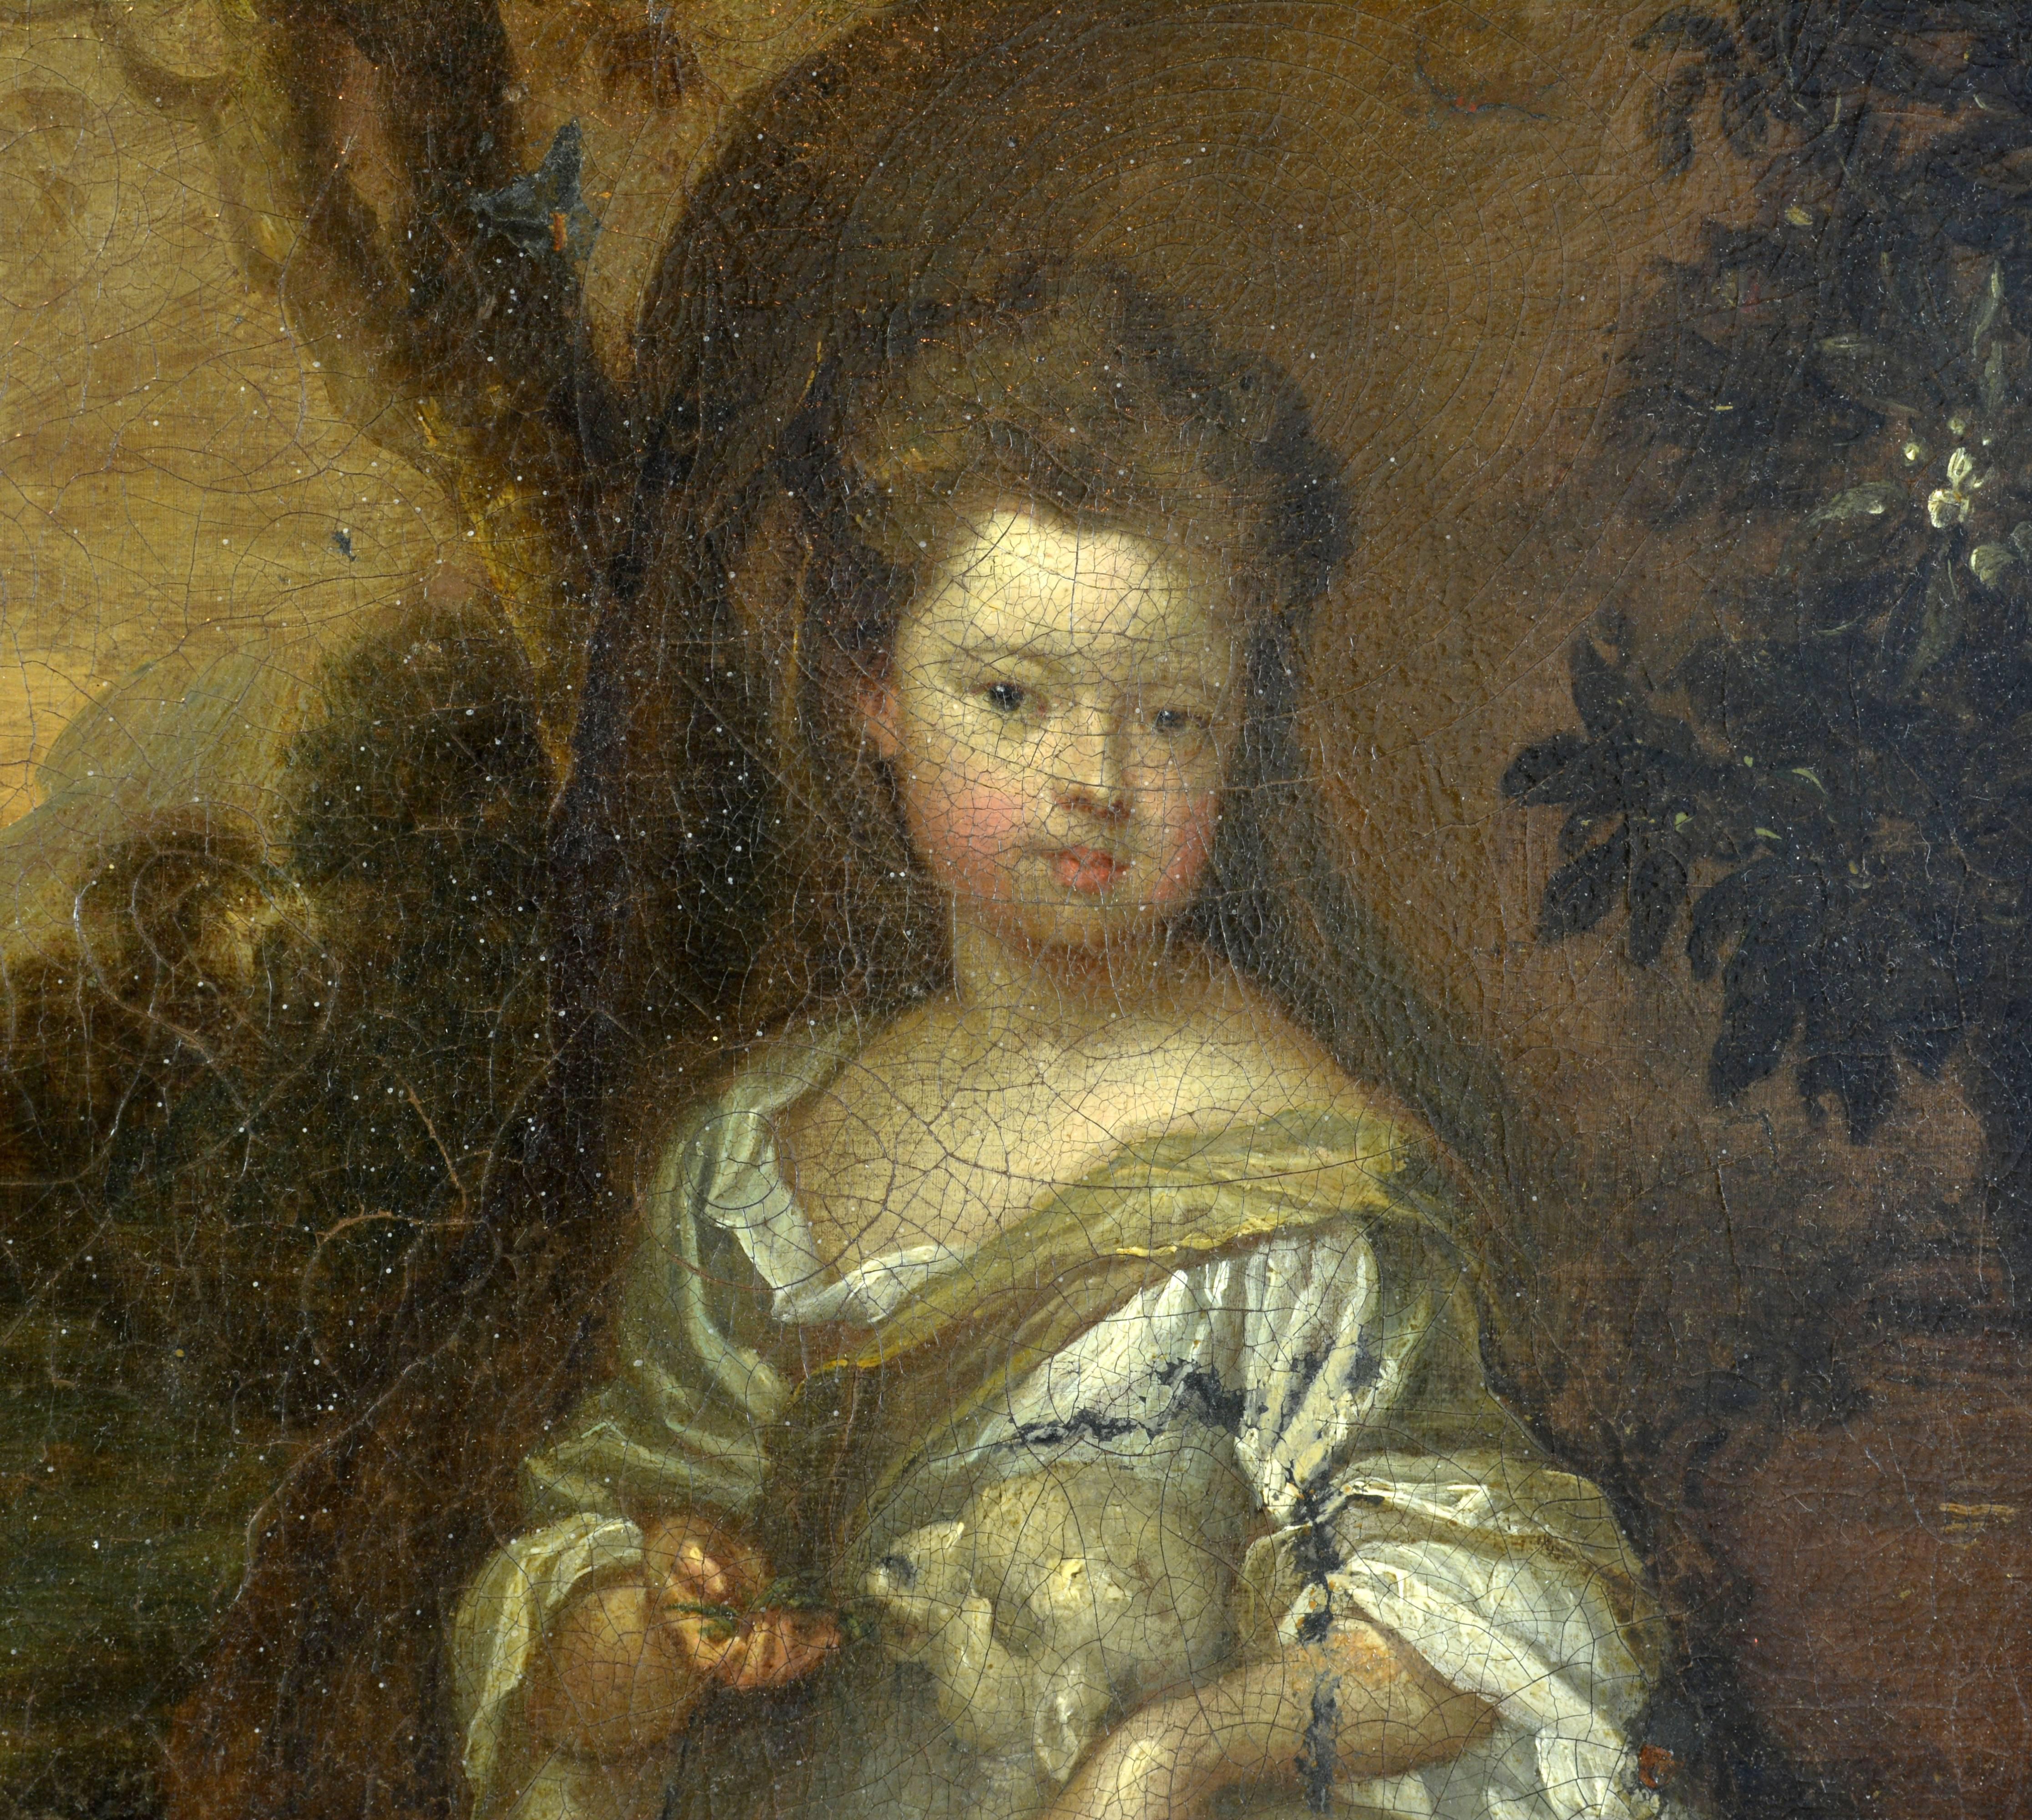 Painted 'Young Girl with a Lamb' School of Sir Godfrey Kneller, British, 1646-1723